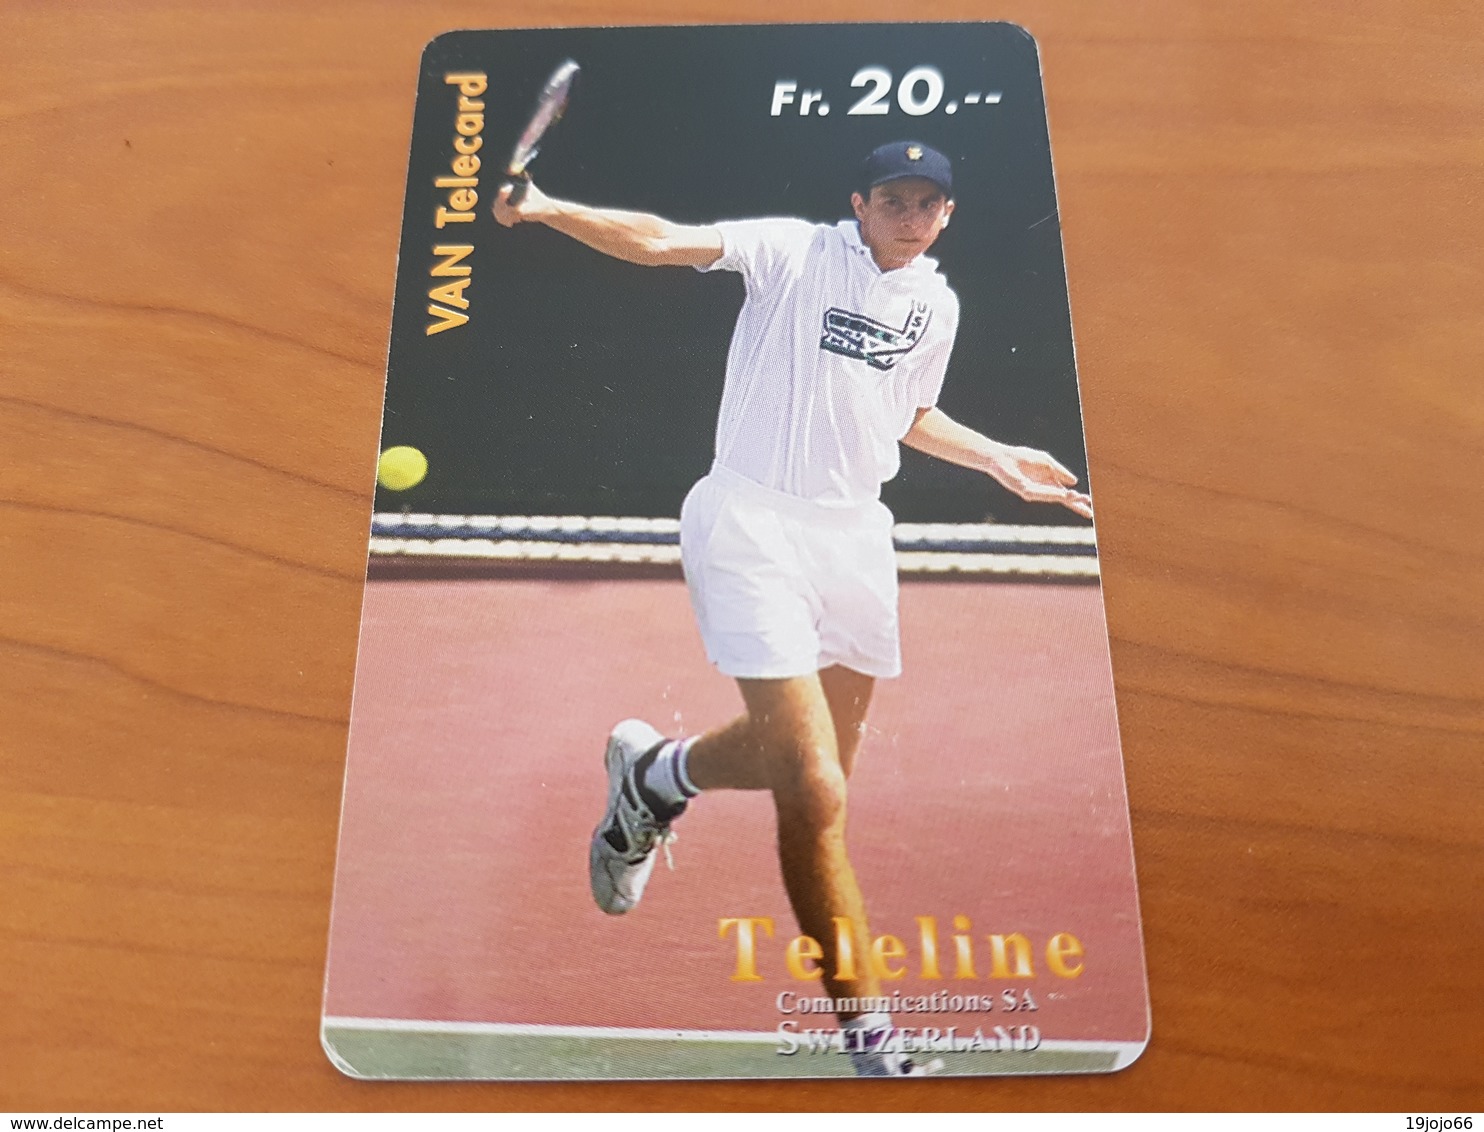 Prepaid Phonecard Card 20 Fr - Tennis Player / Sport -  Teleline   -  Fine Used - Suiza